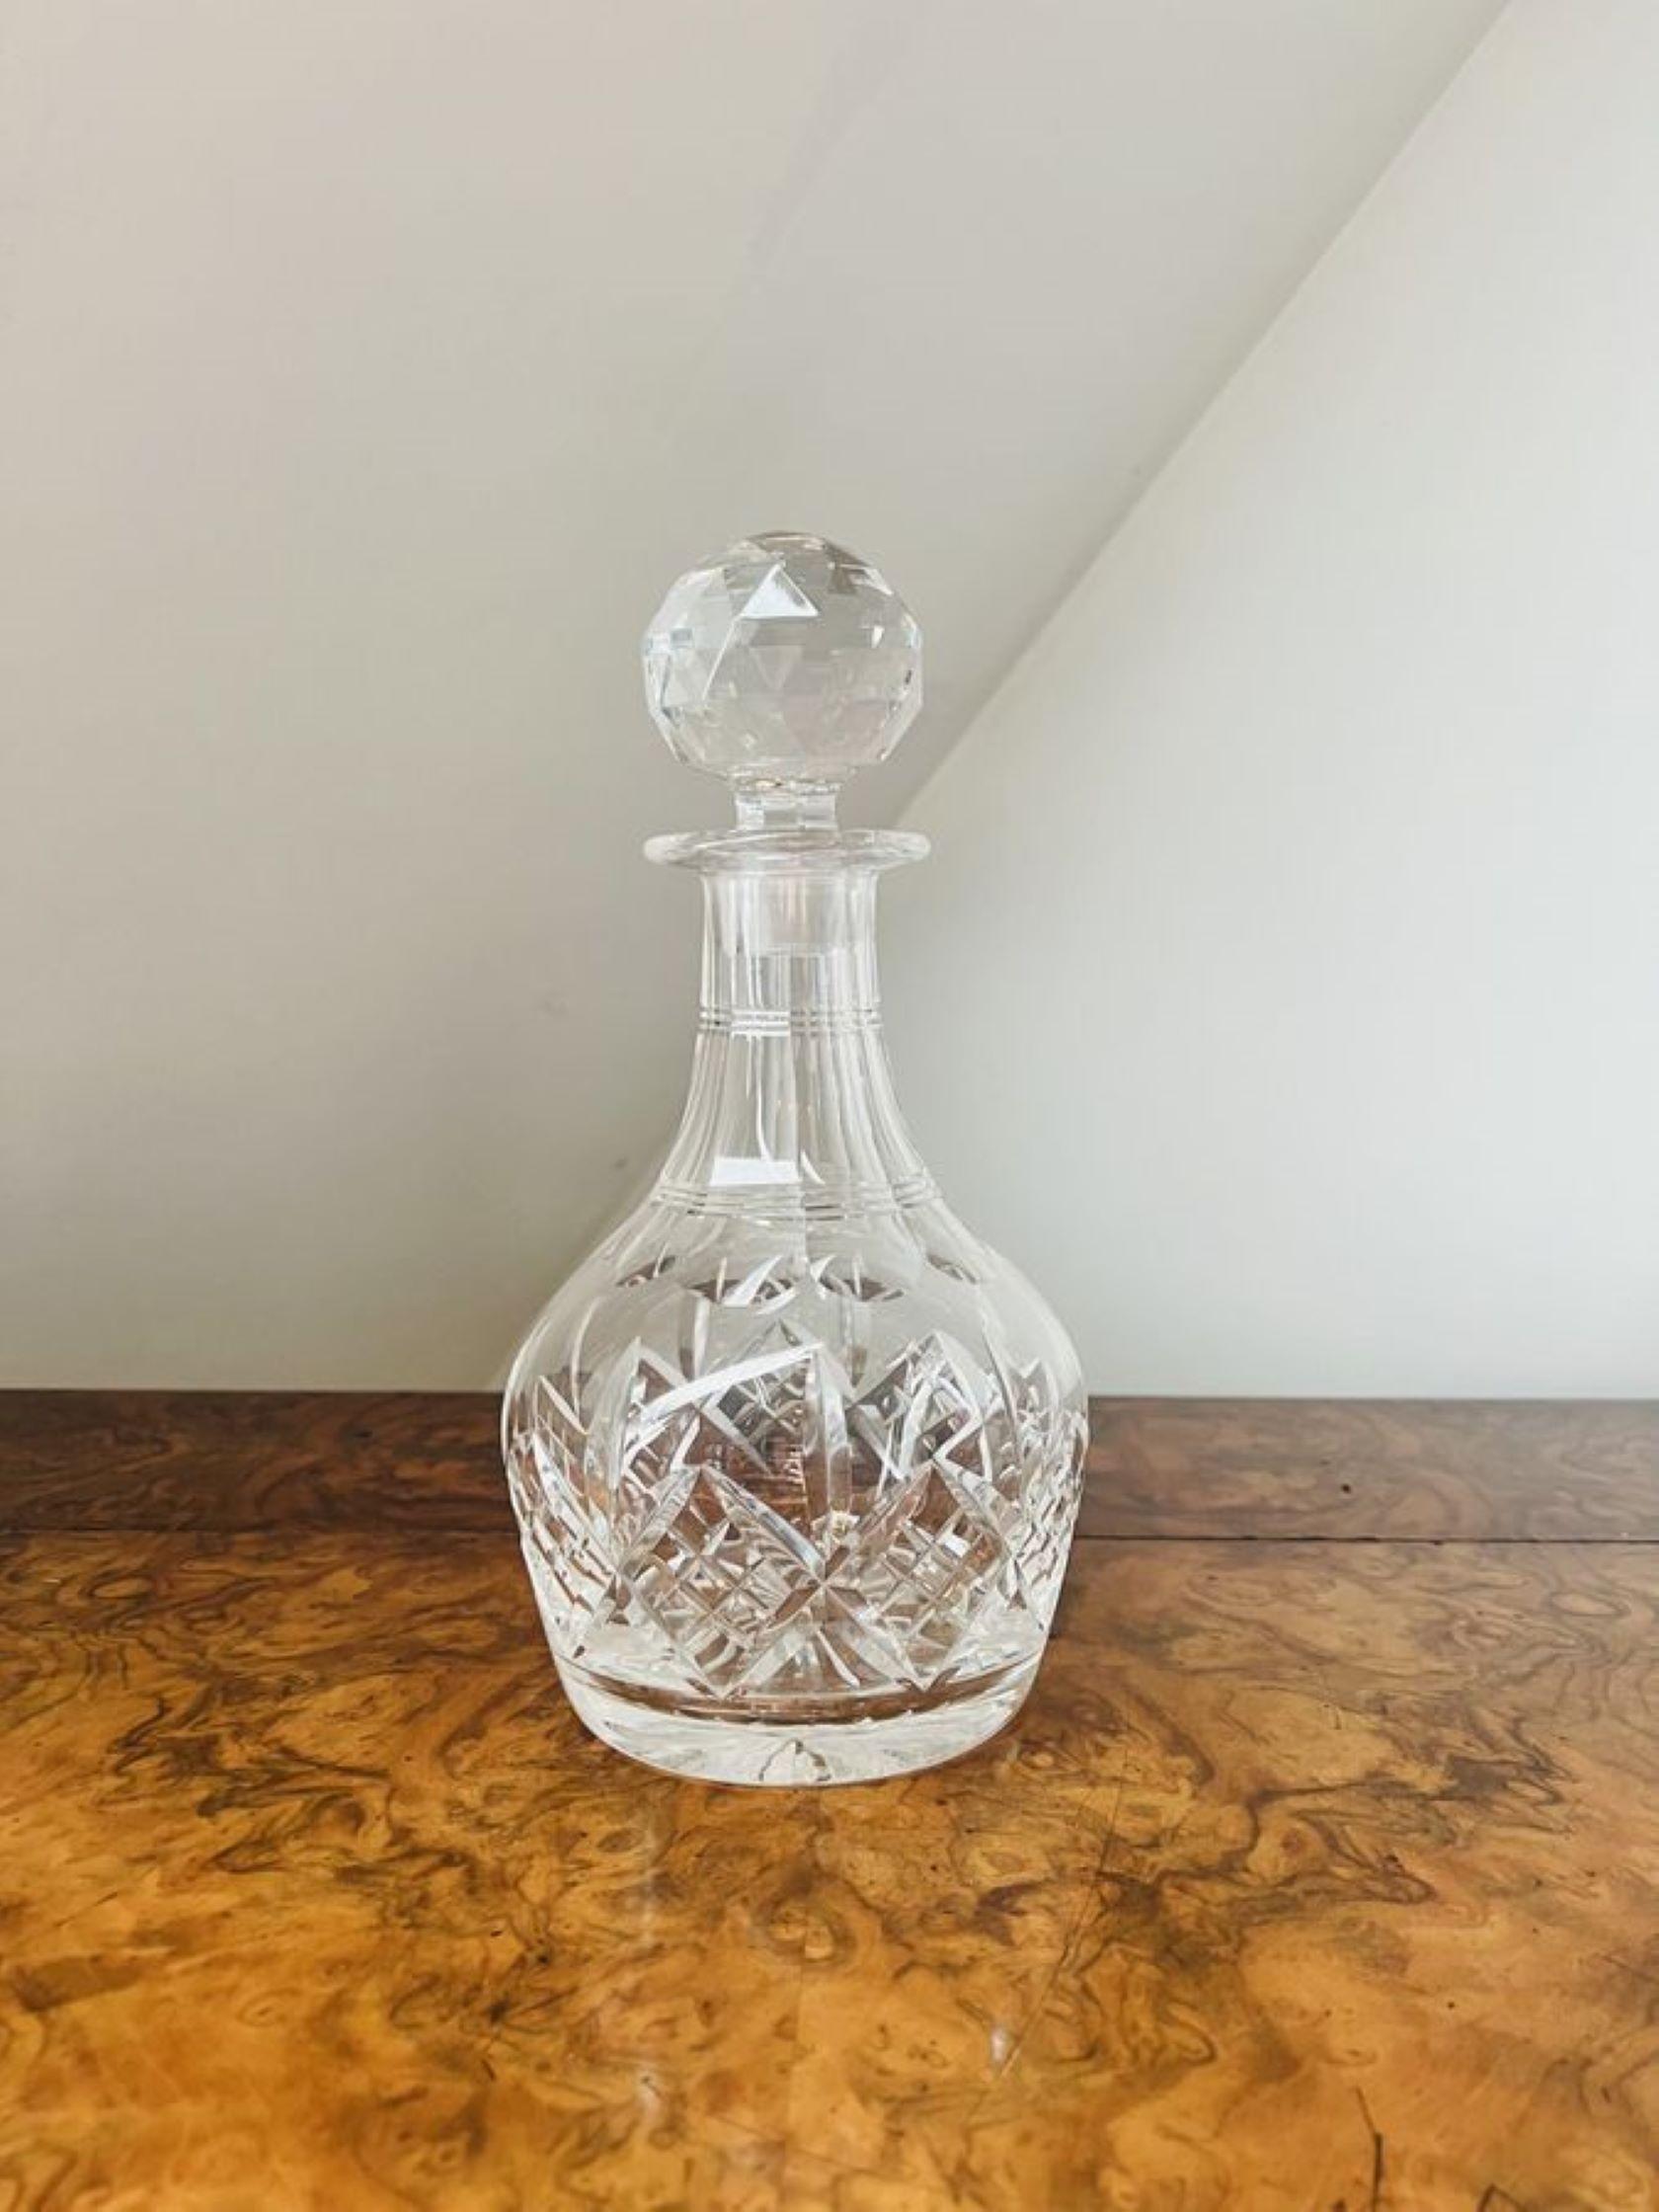 Lovely antique Edwardian cut glass decanter having a lovely shaped decanter with cut glass detail and the original glass stopper.

D. 1900